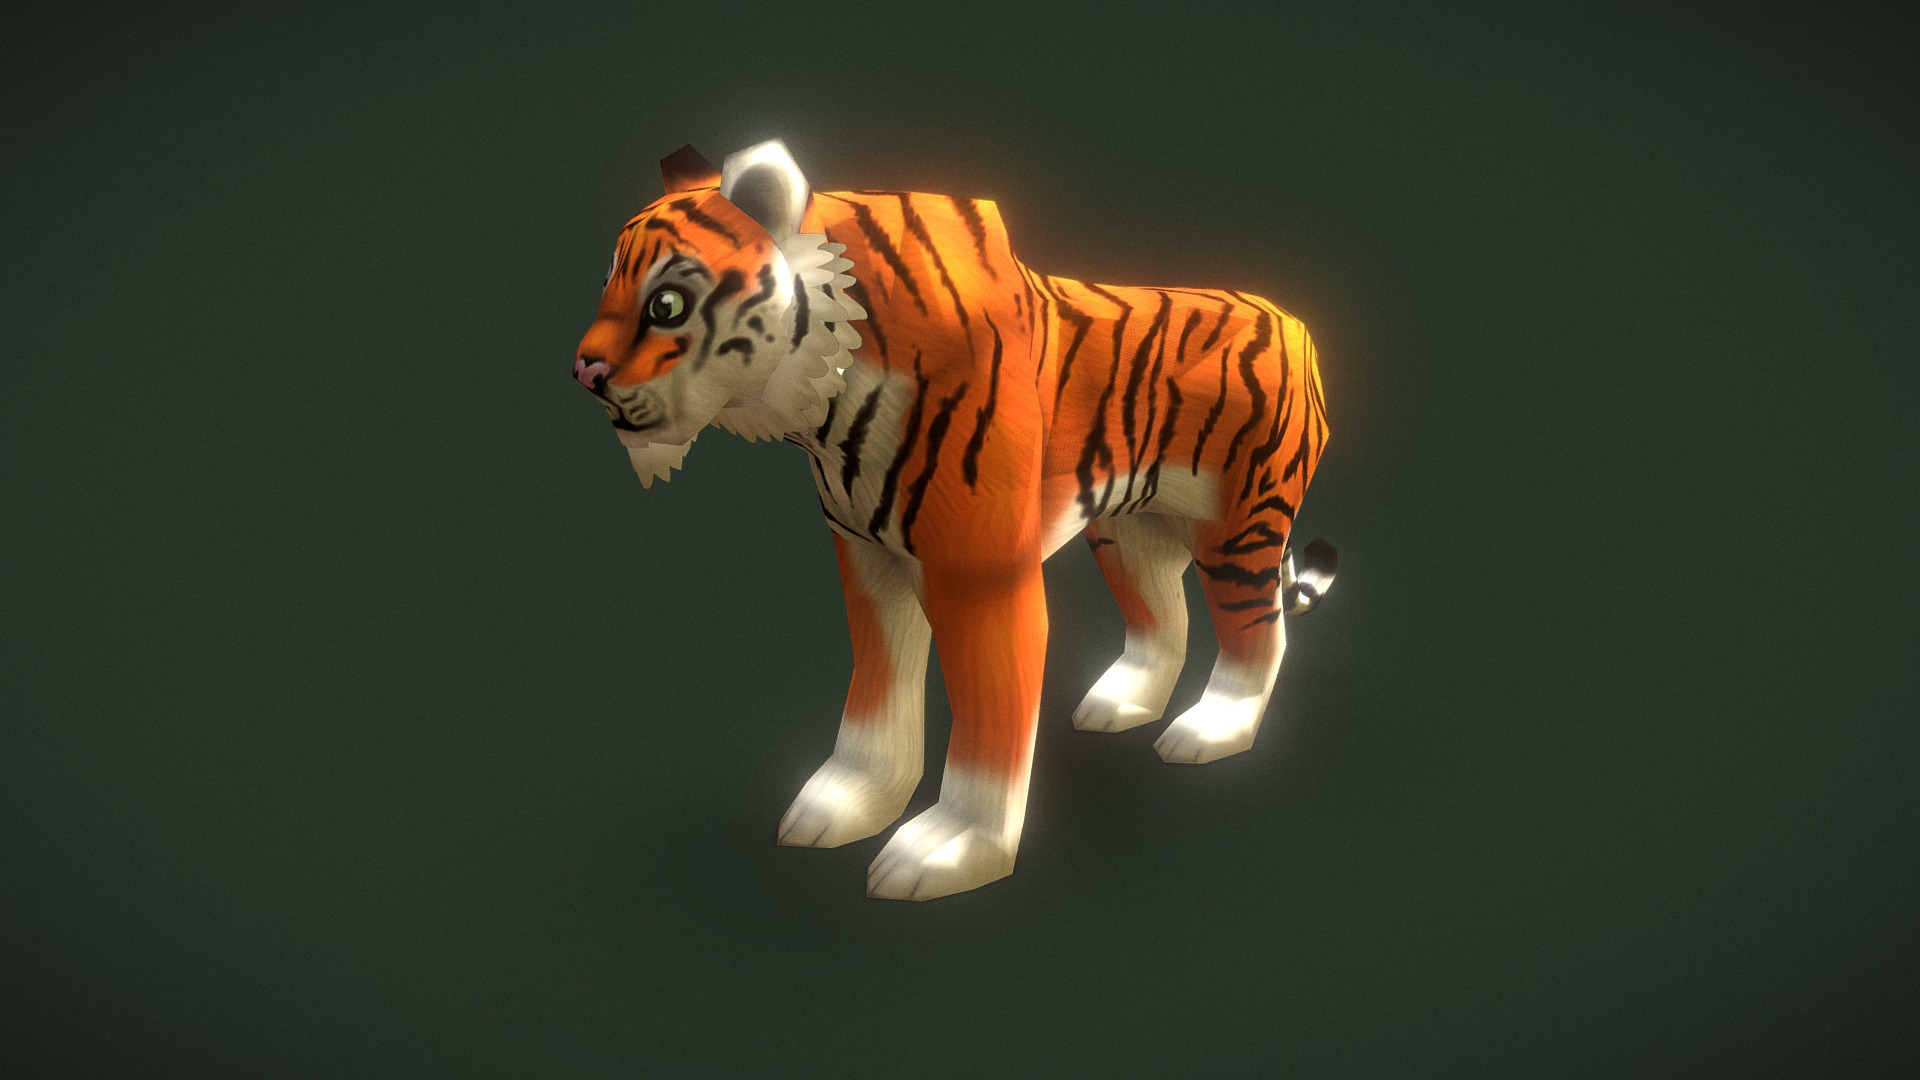 3D model Low Poly Hand-Painted Tiger - This is a 3D model of the Low Poly Hand-Painted Tiger. The 3D model is about a tiger running on a green background.